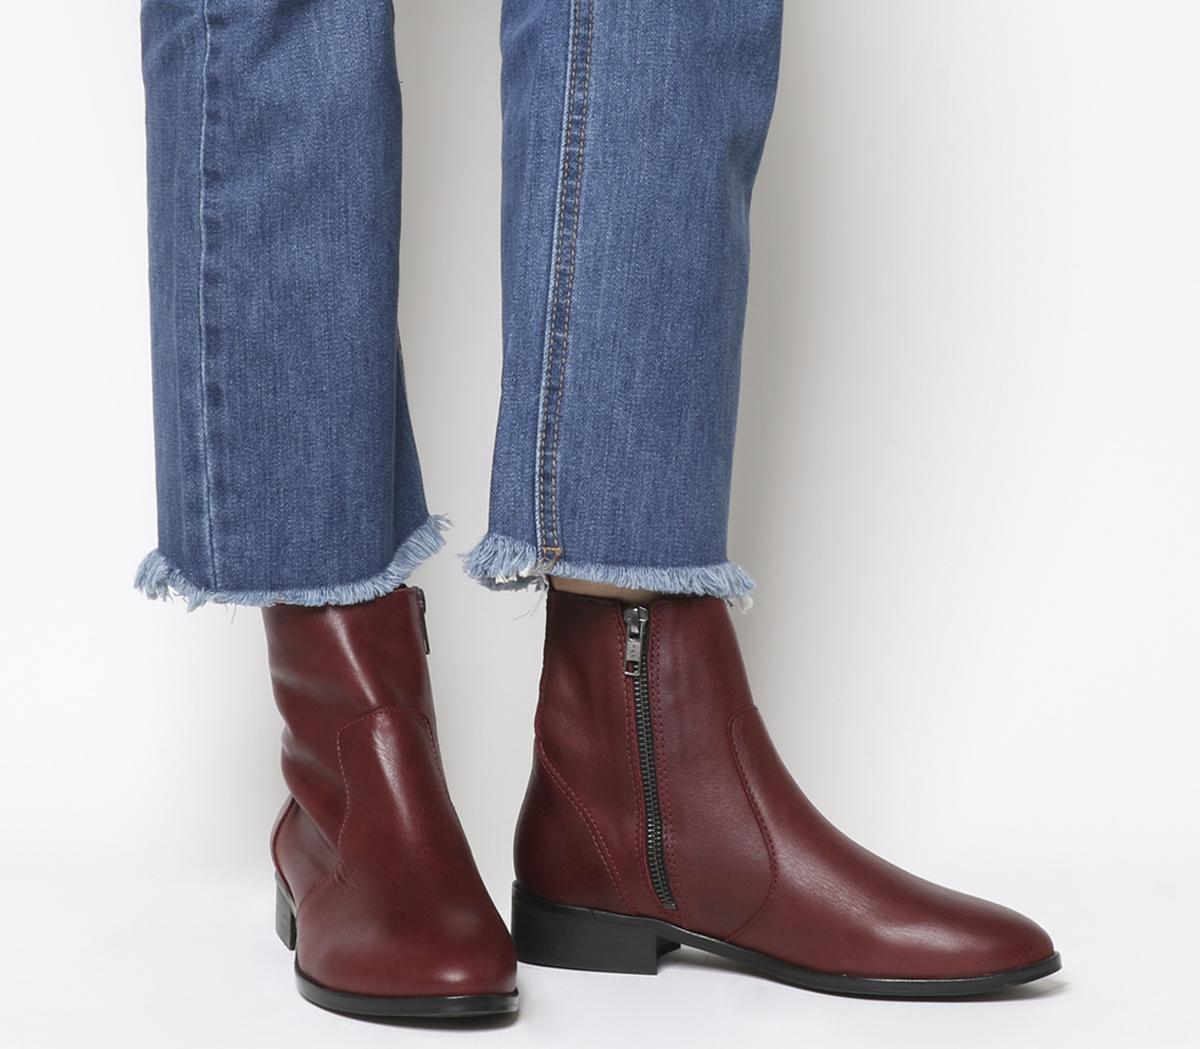 OFFICEAshleigh Flat Ankle BootsNew Burgundy Leather